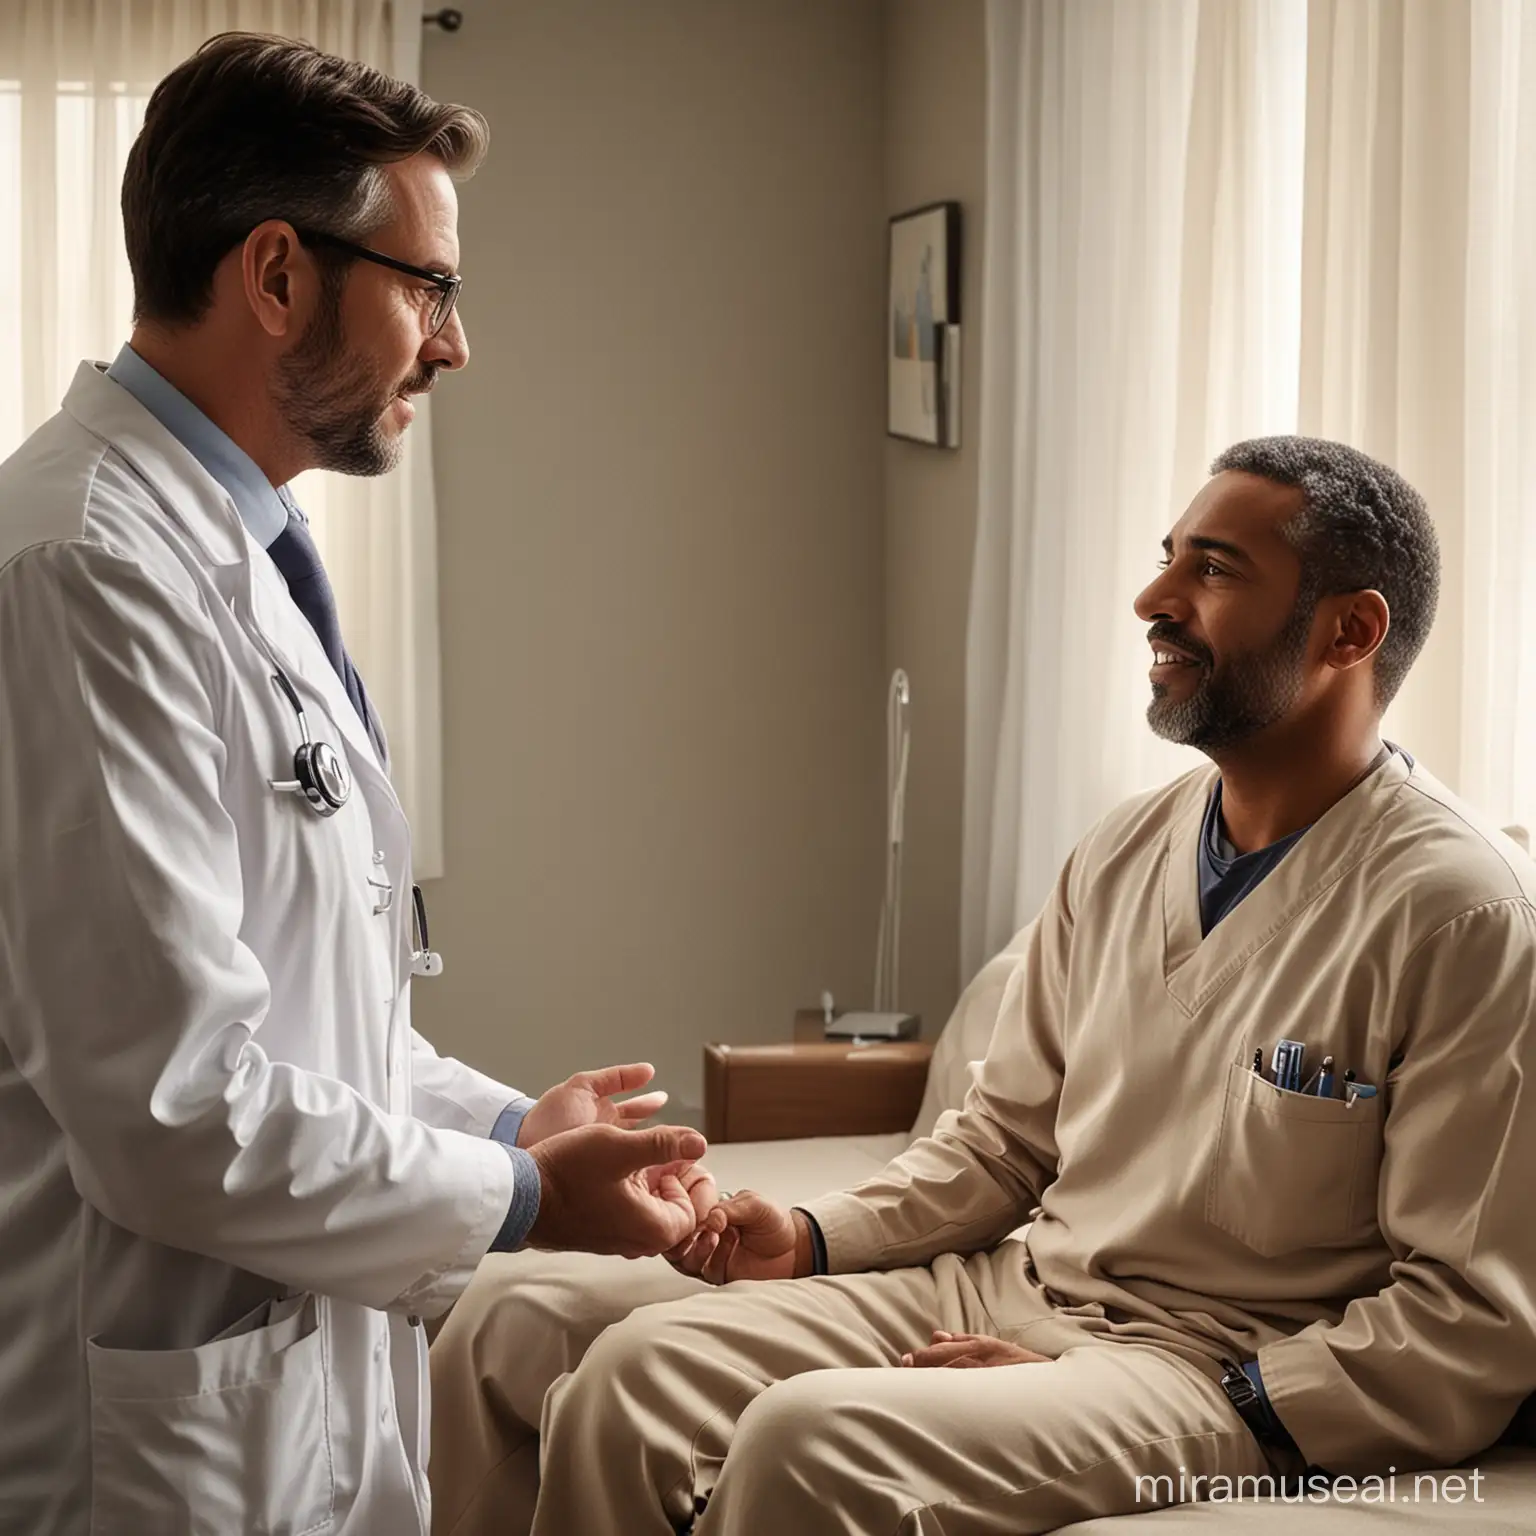 This visualization depicts a male patient and a physician in a personal and engaging dialogue from the comfort of home.